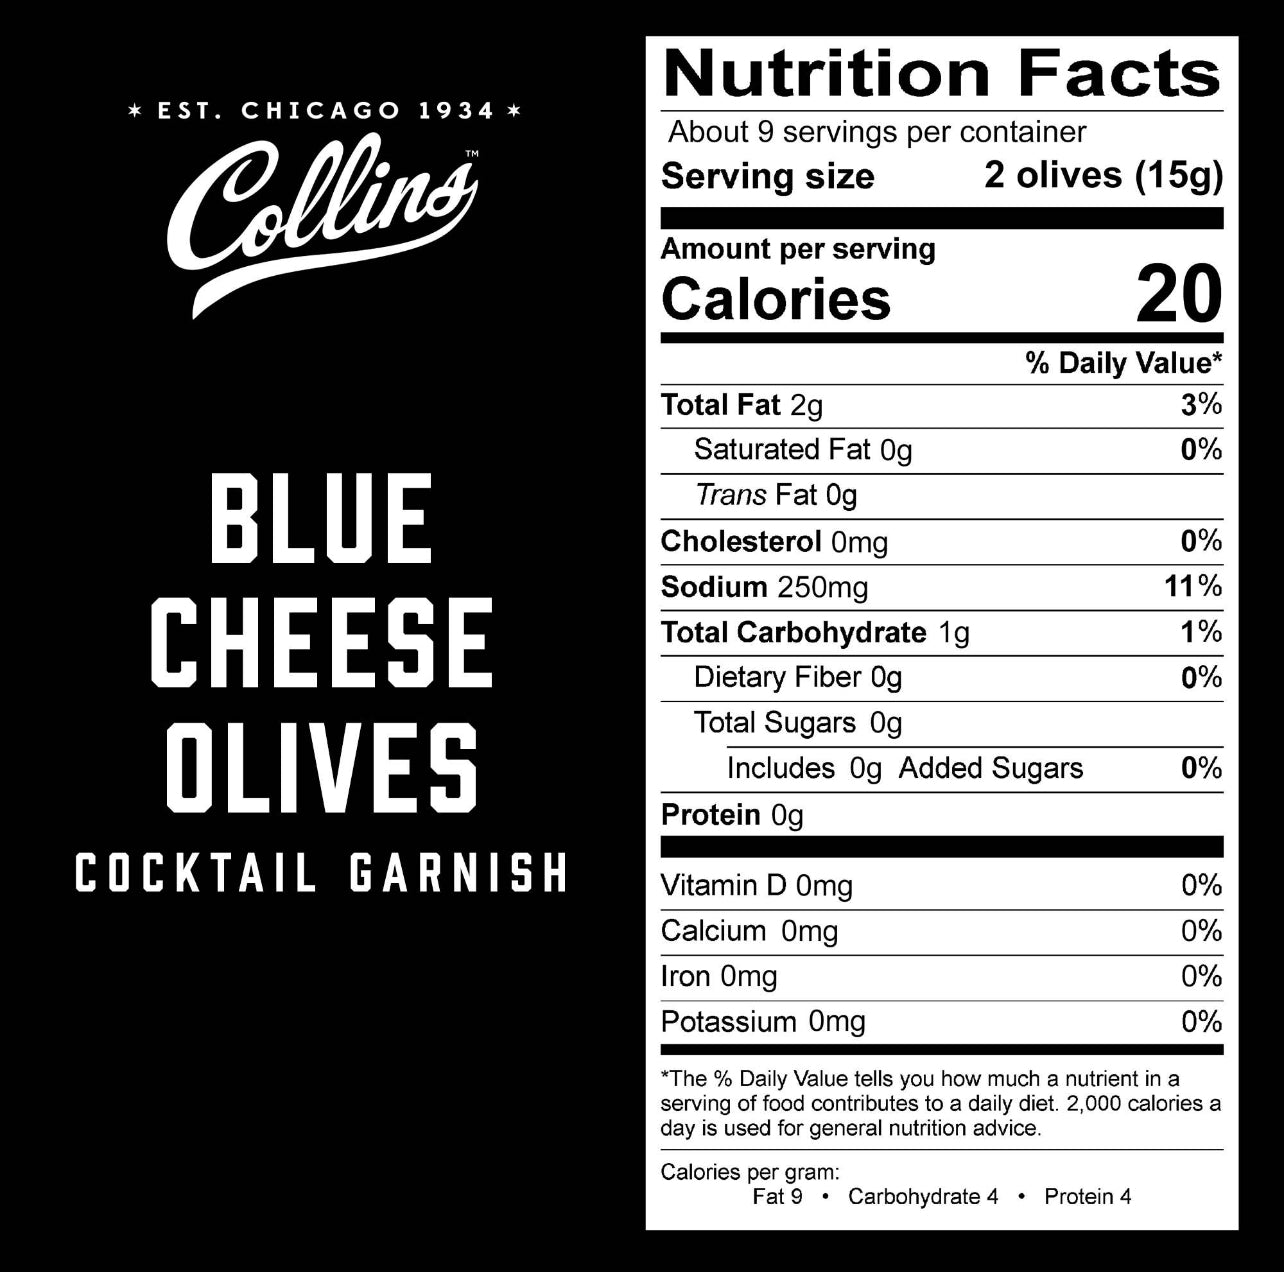 nutritional label for the bottle of blue cheese gourmet olives cocktail garnish by Collins